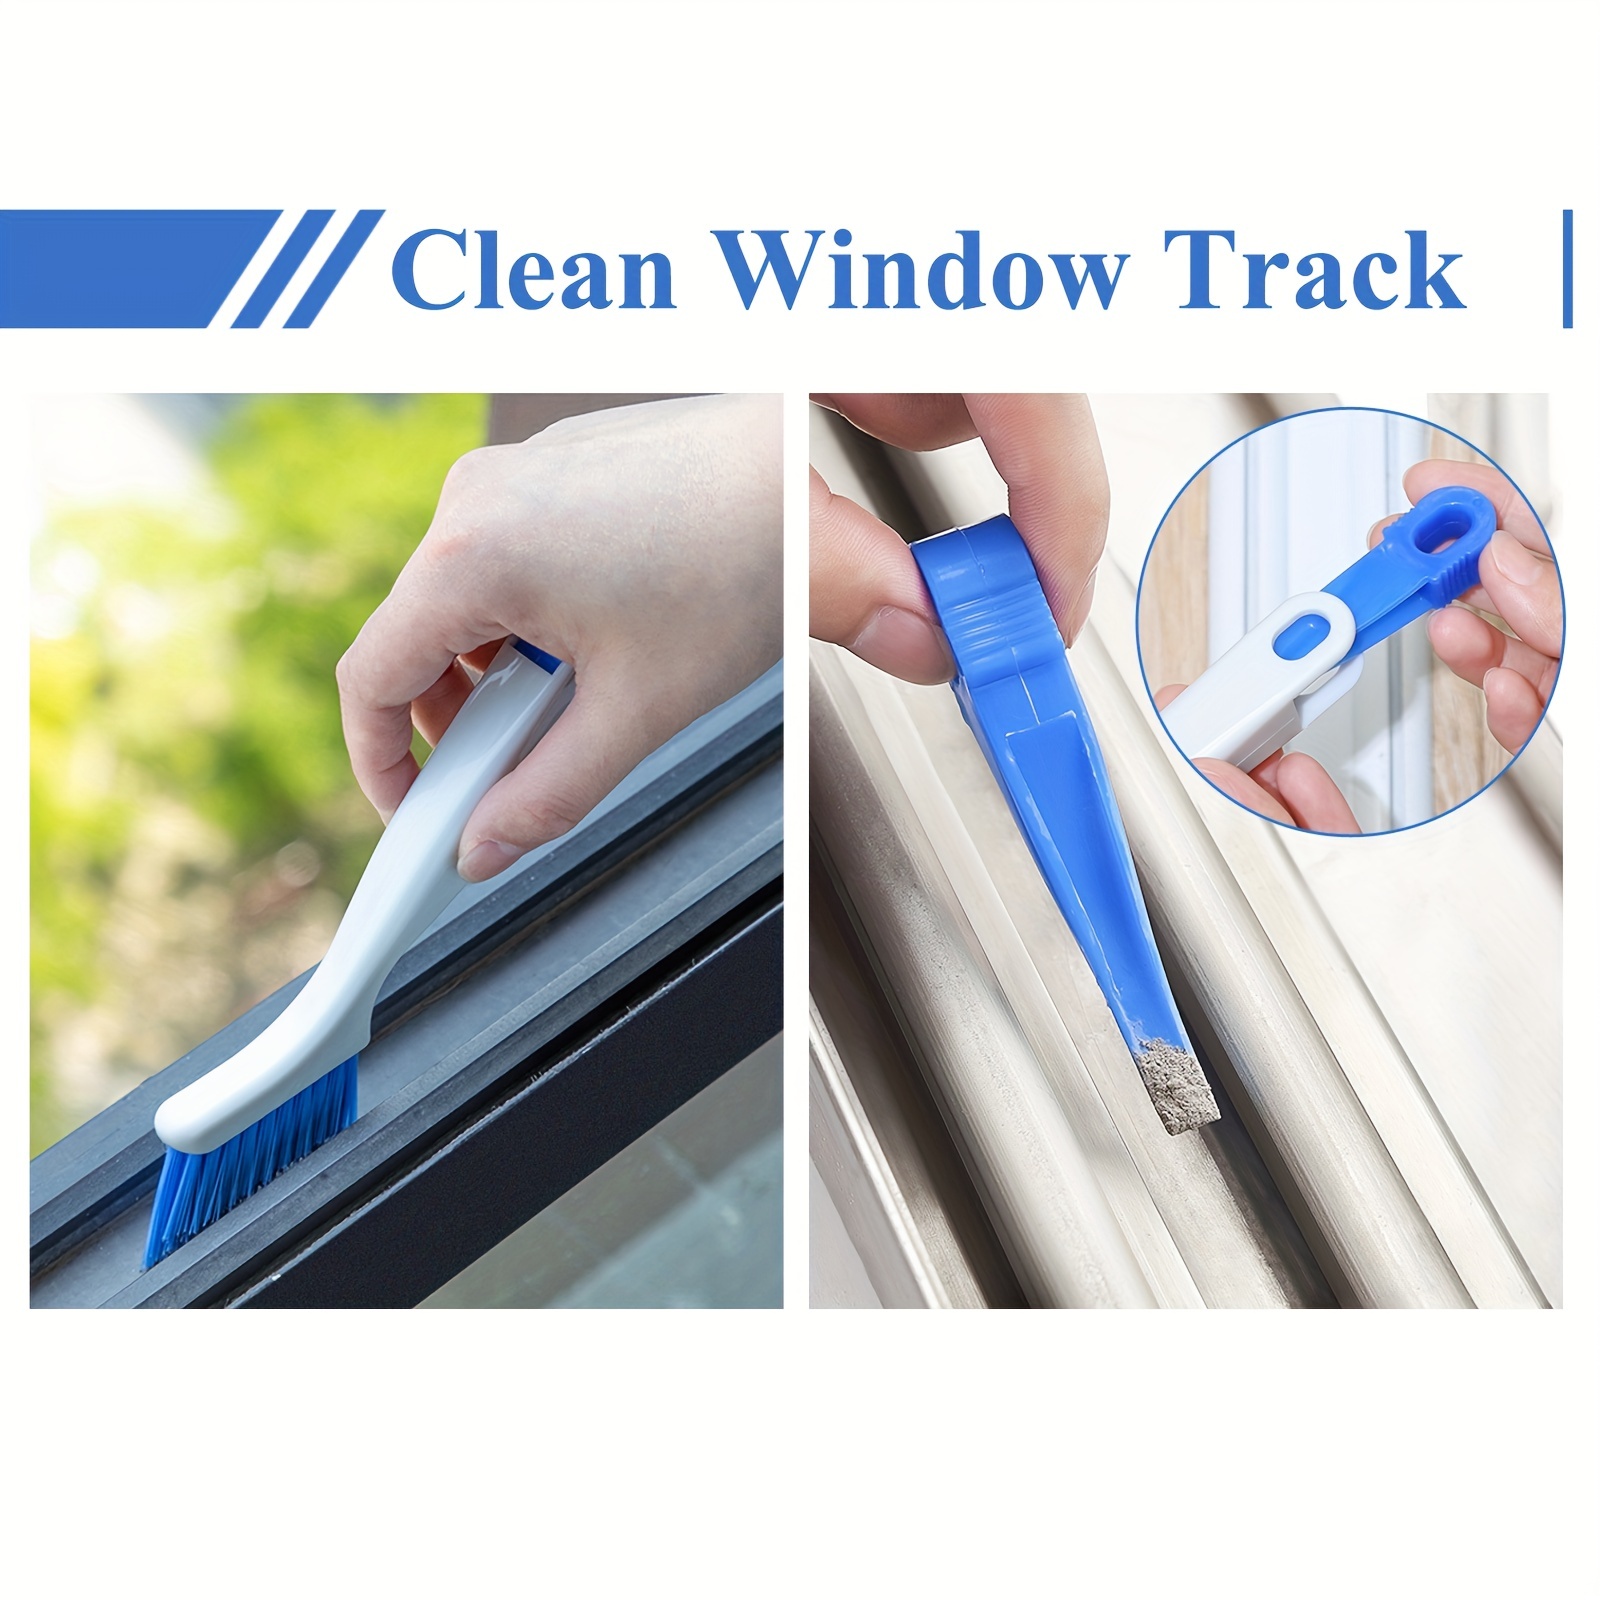 Window Cleaning Brush, Groove Cleaning Tool, Window Track Cleaner